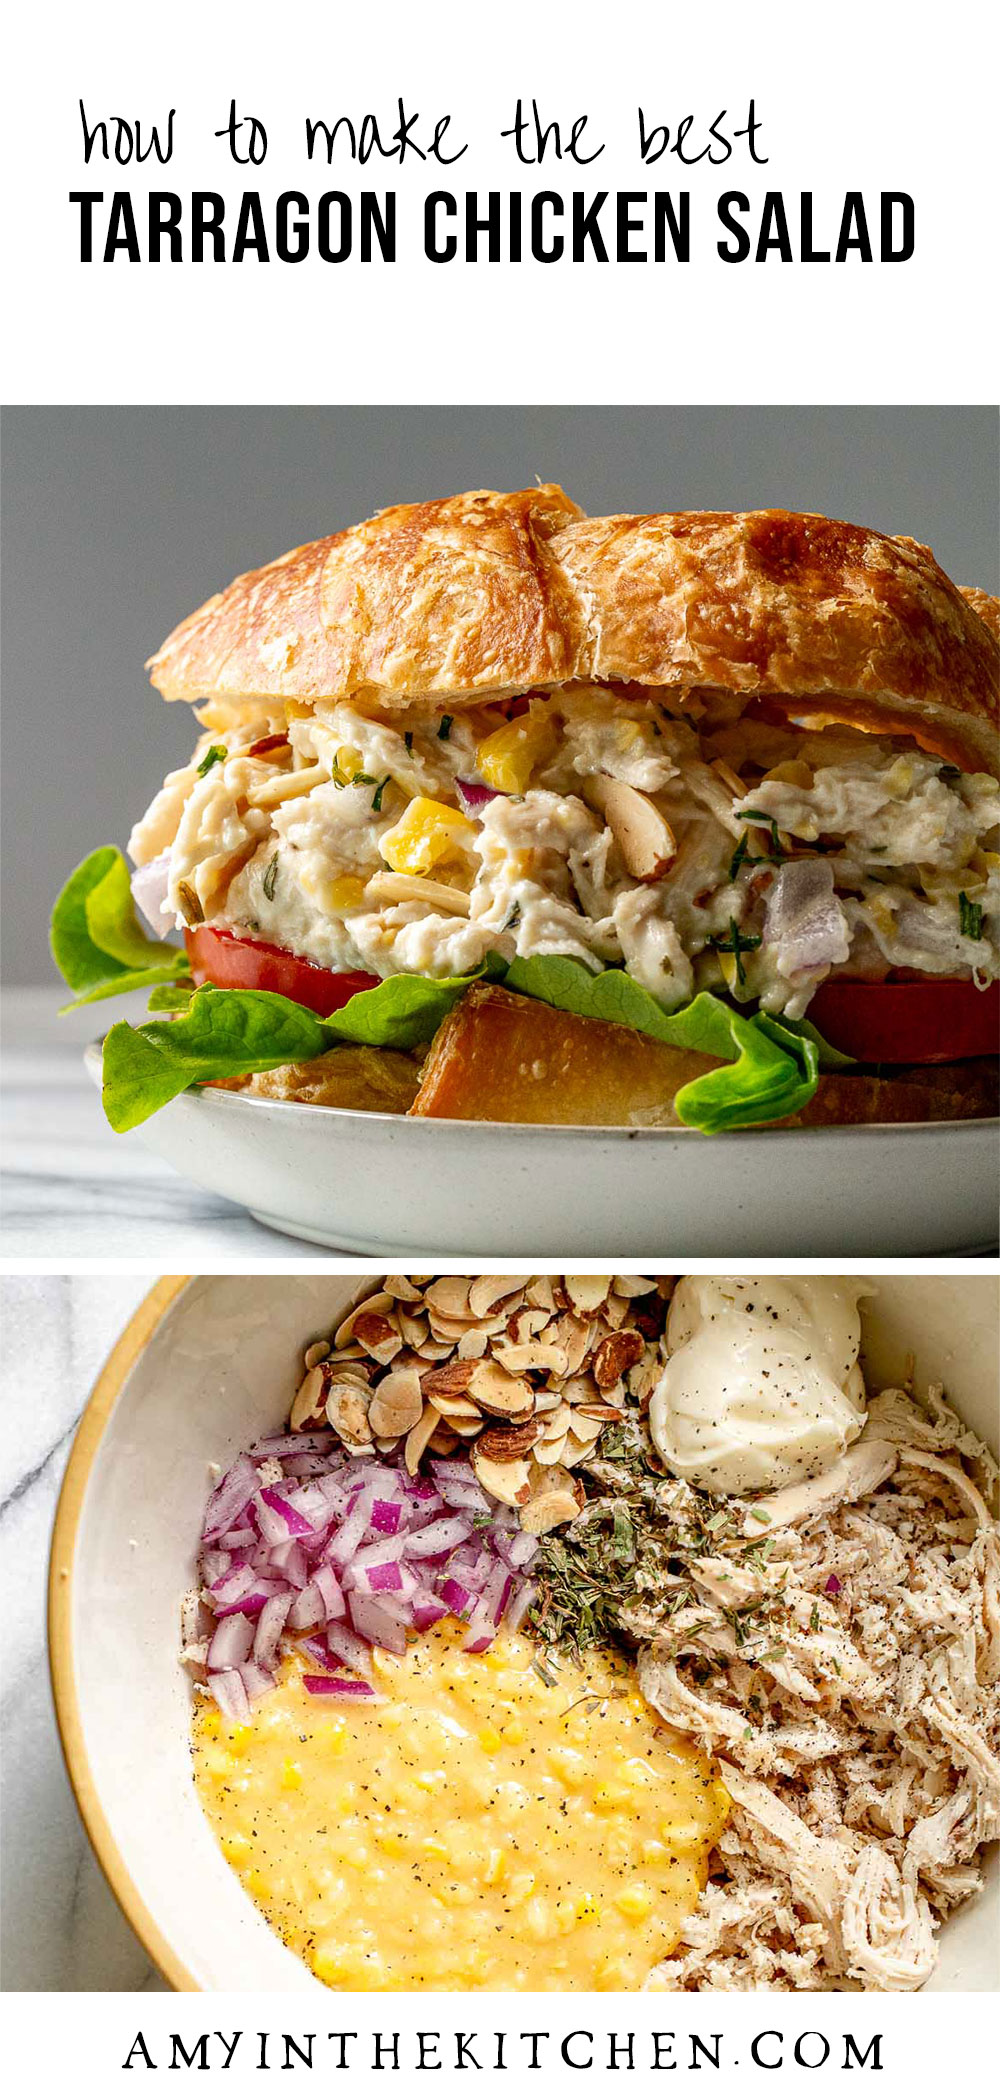 Tarragon Chicken Salad with Almonds| Amy in the Kitchen